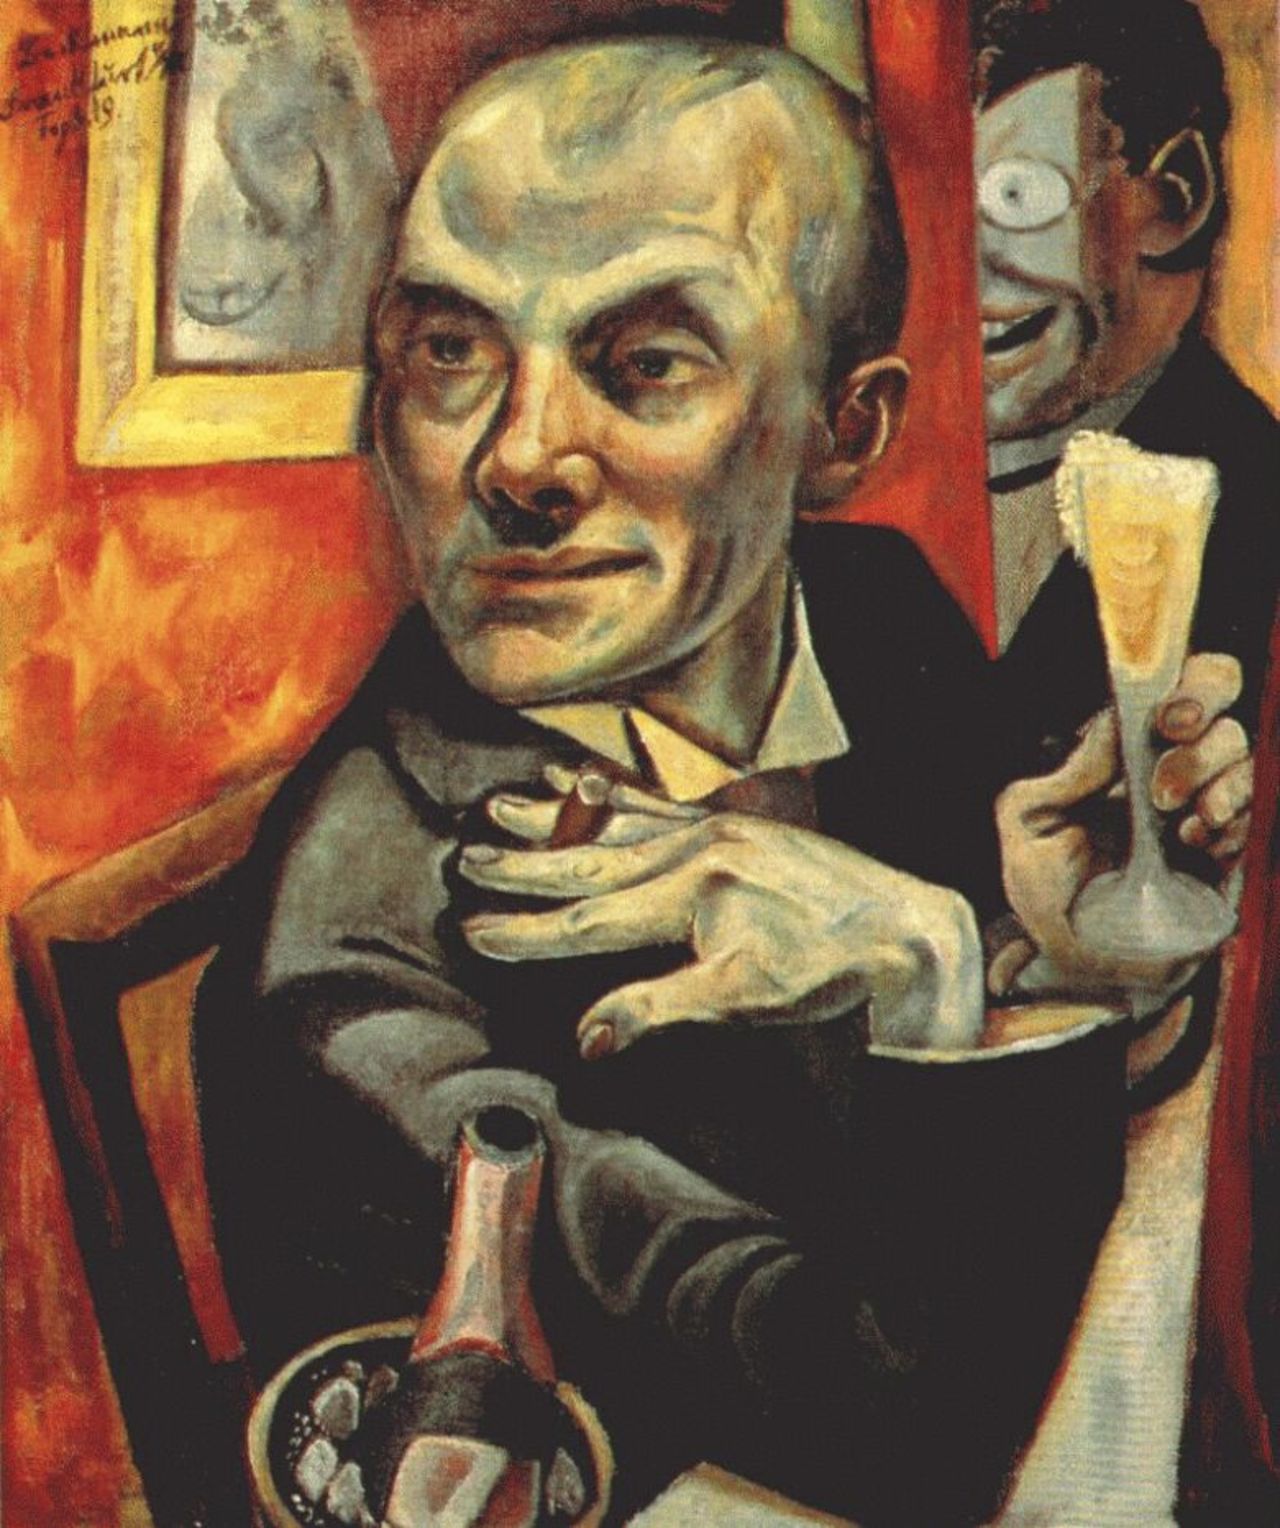 German artist Max Beckmann was #bornonthisday in 1884. We love his ‘Self-portrait with Champagne Glass', 1919 http://t.co/zfZrCrZsXl